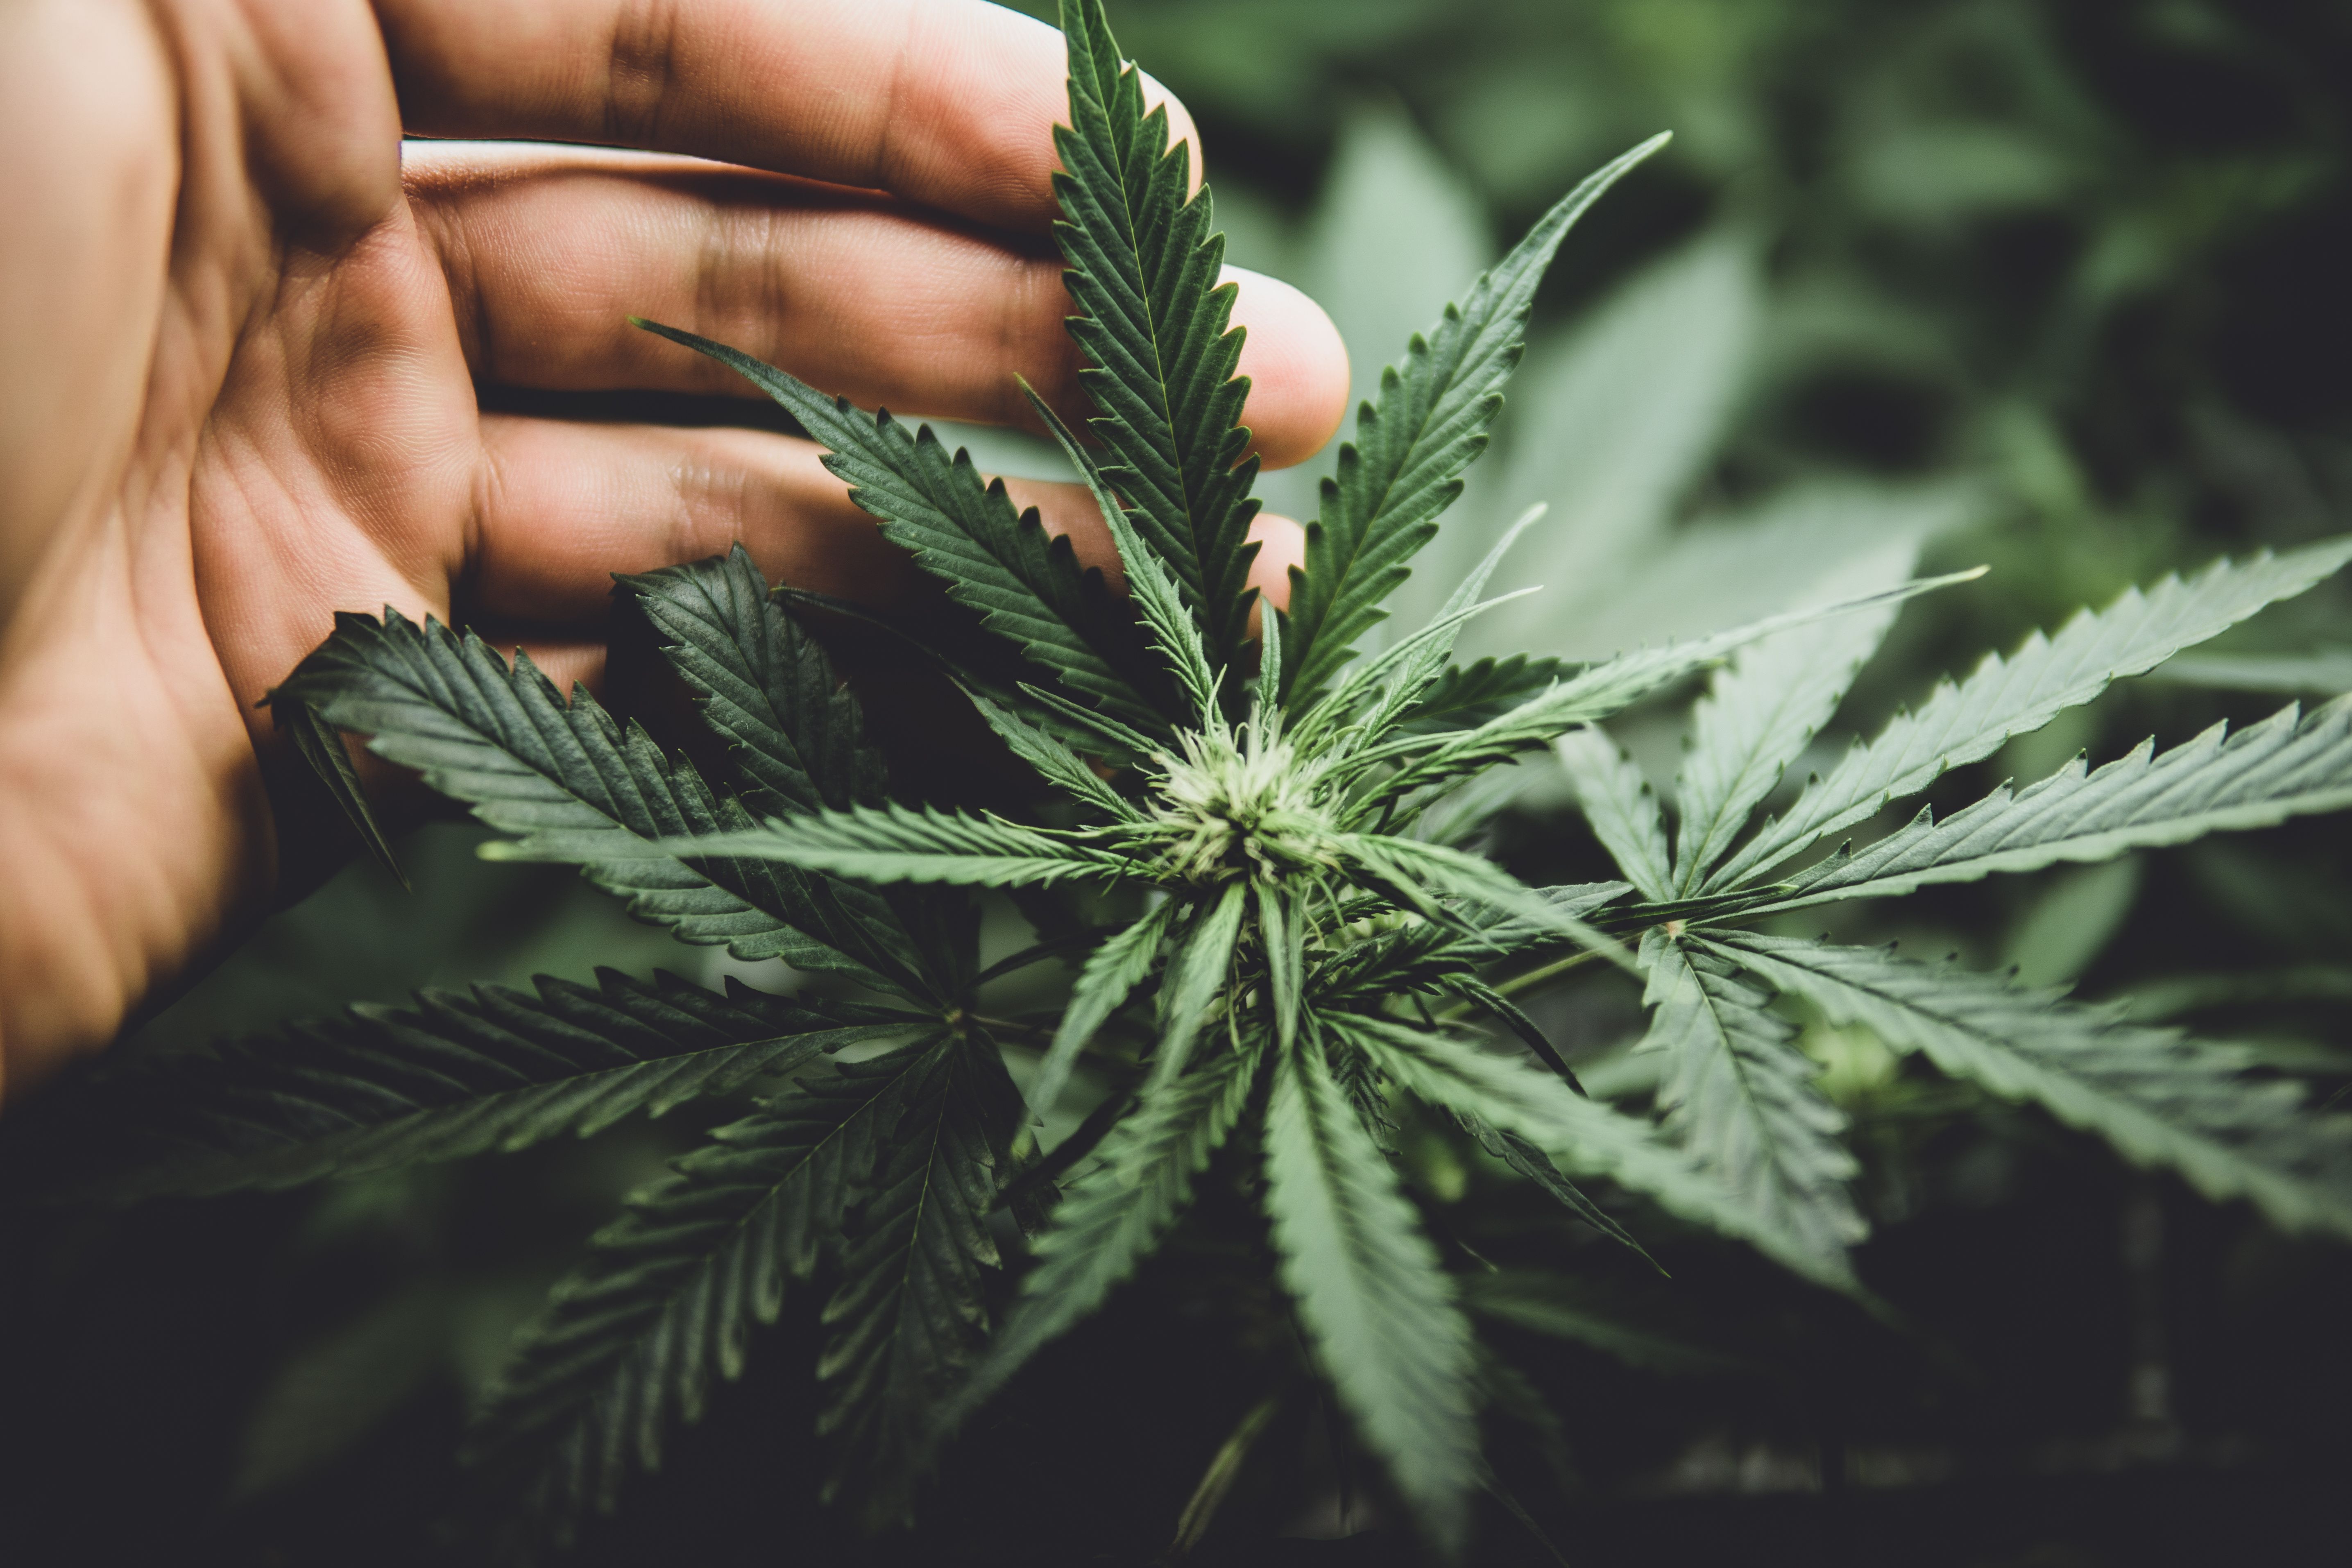 Cannabis Significantly Improves Quality of Life in Women with Treatment-Resistant Fibromyalgia